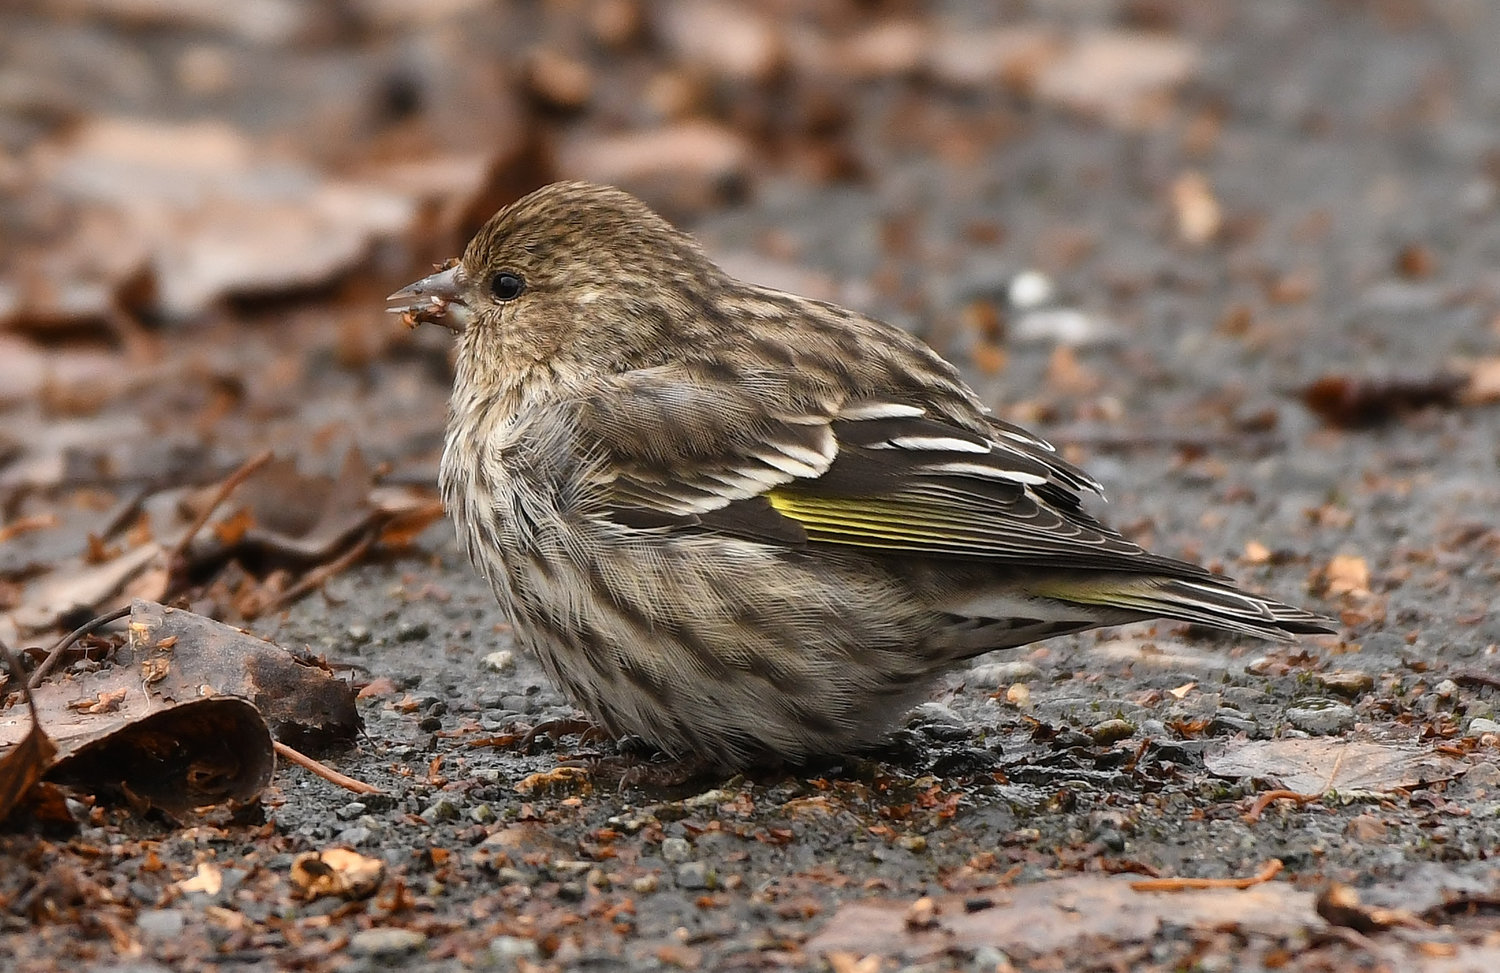 This Pine Siskin is one of 3,087 of its kind spotted during the Lewic County Christmas Bird Count Dec. 18, making it the most common seen bird that day.